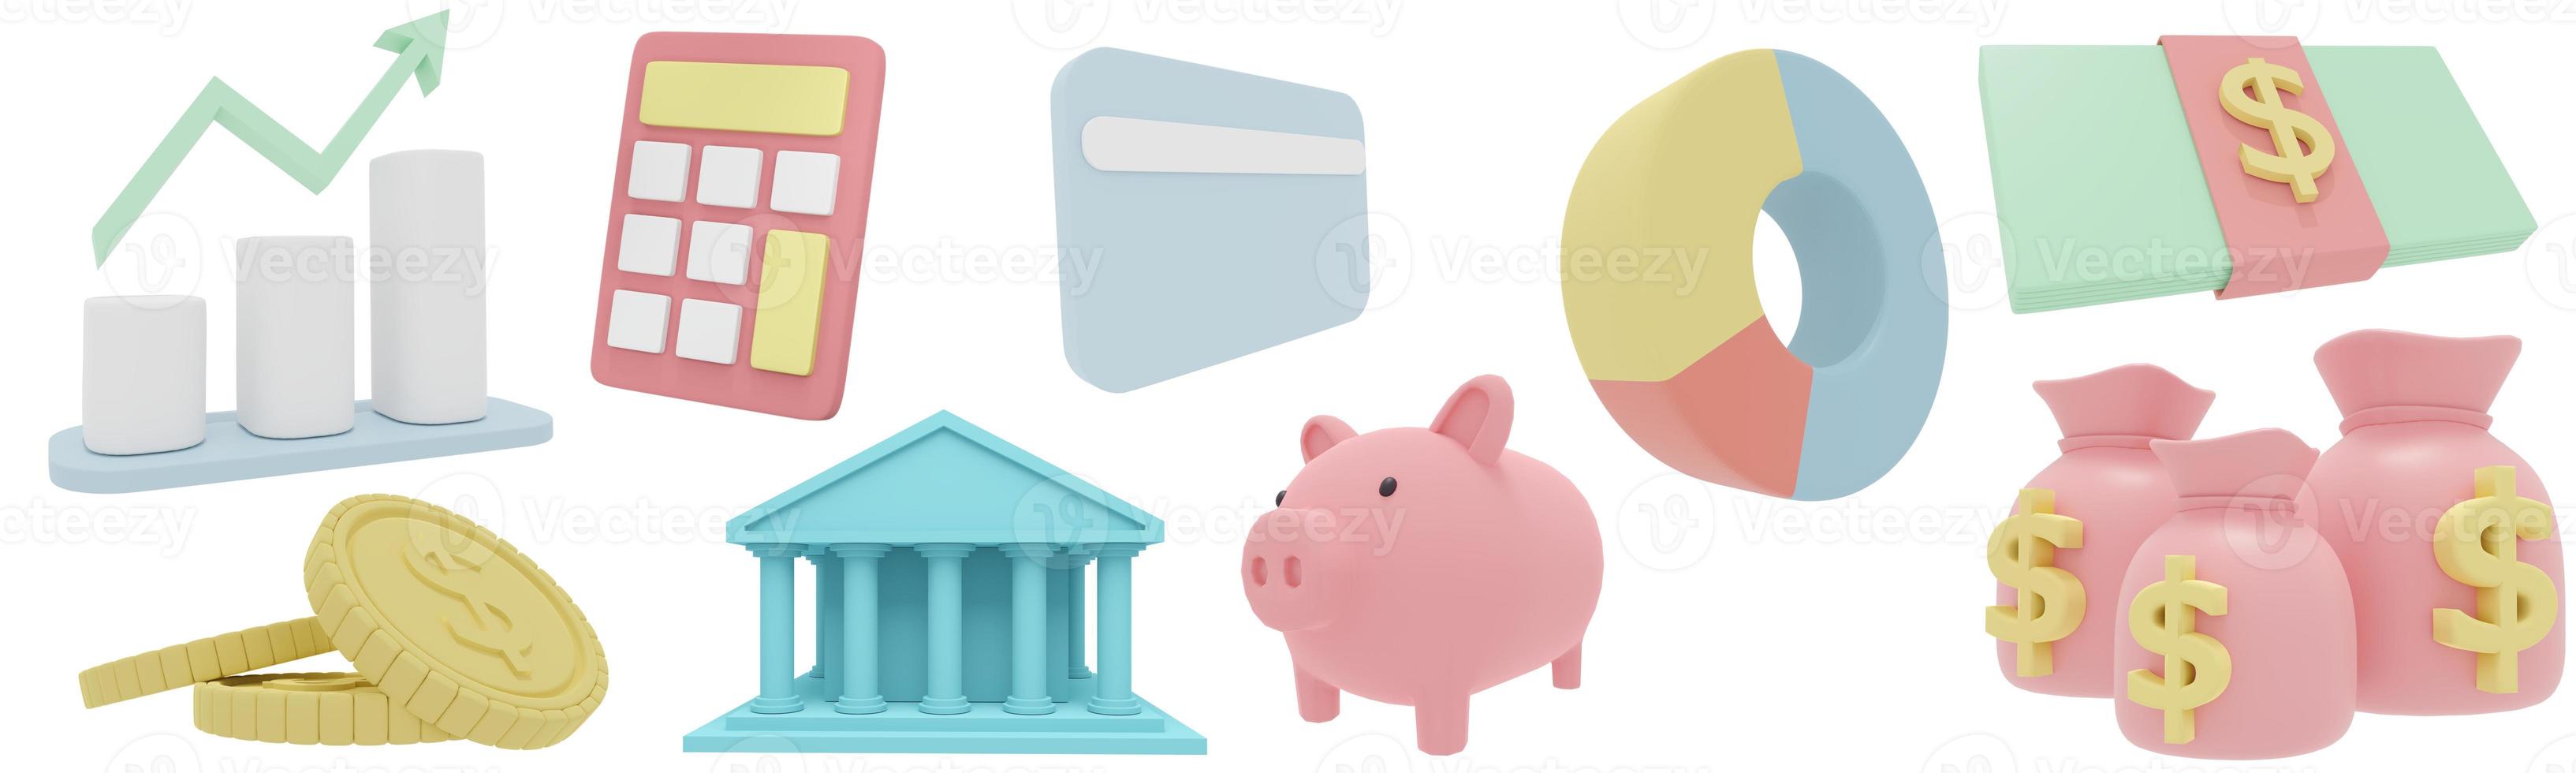 Set of 3D Rendering of minimal pastel money investment elements isolate on white background. 3D Render illustration. photo